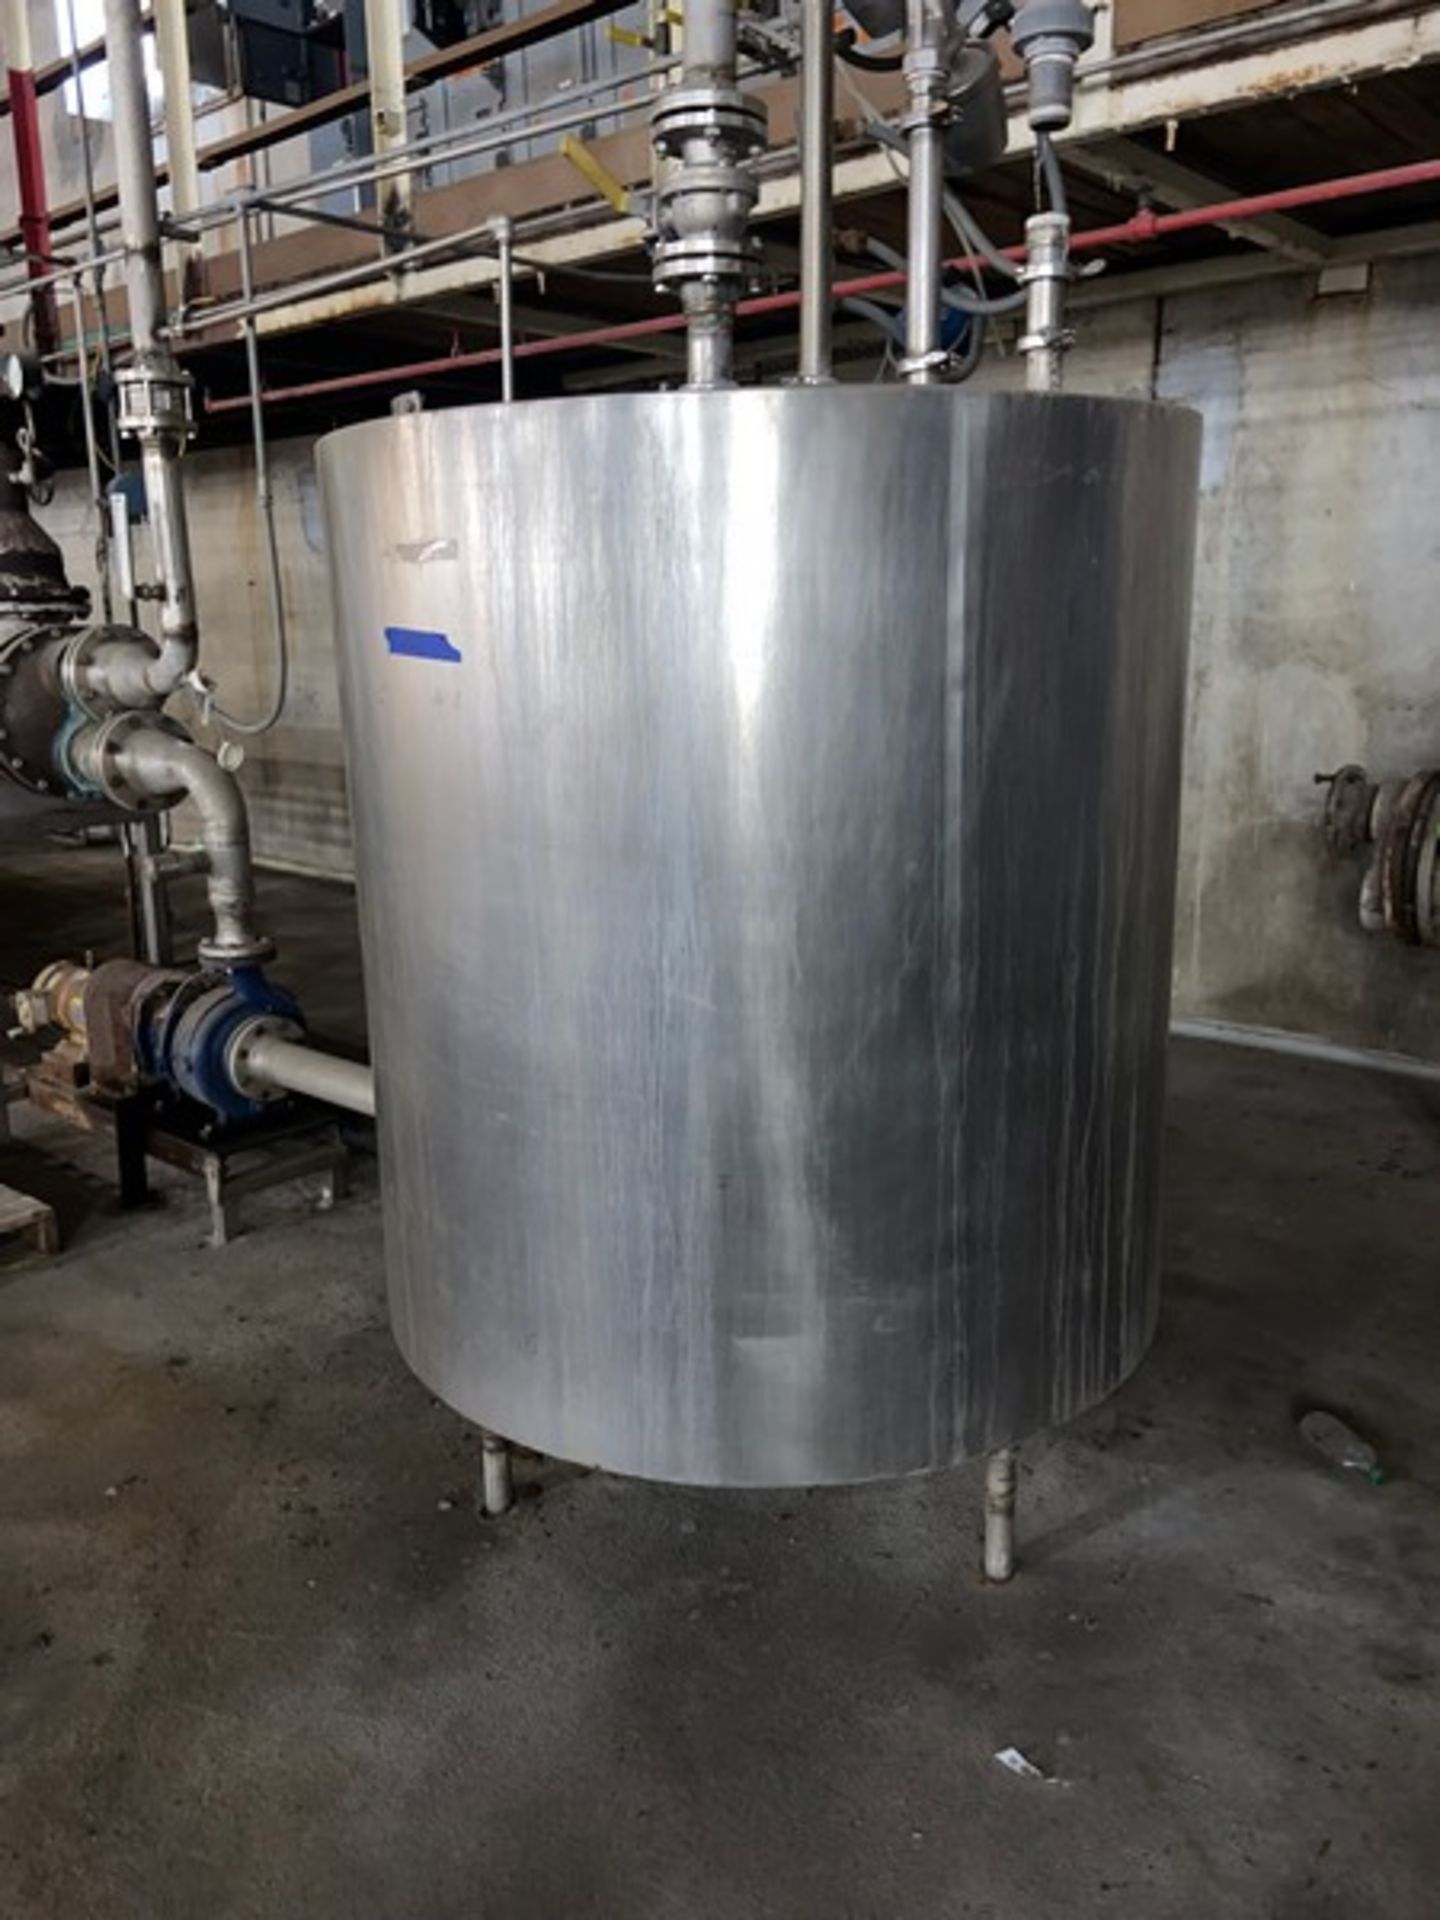 Damrow Bros. 400 Gal. S/S Vertical Insulated Tank, S/N 25609, with S/S Hinge Lid, Mounted on S/S - Image 2 of 16